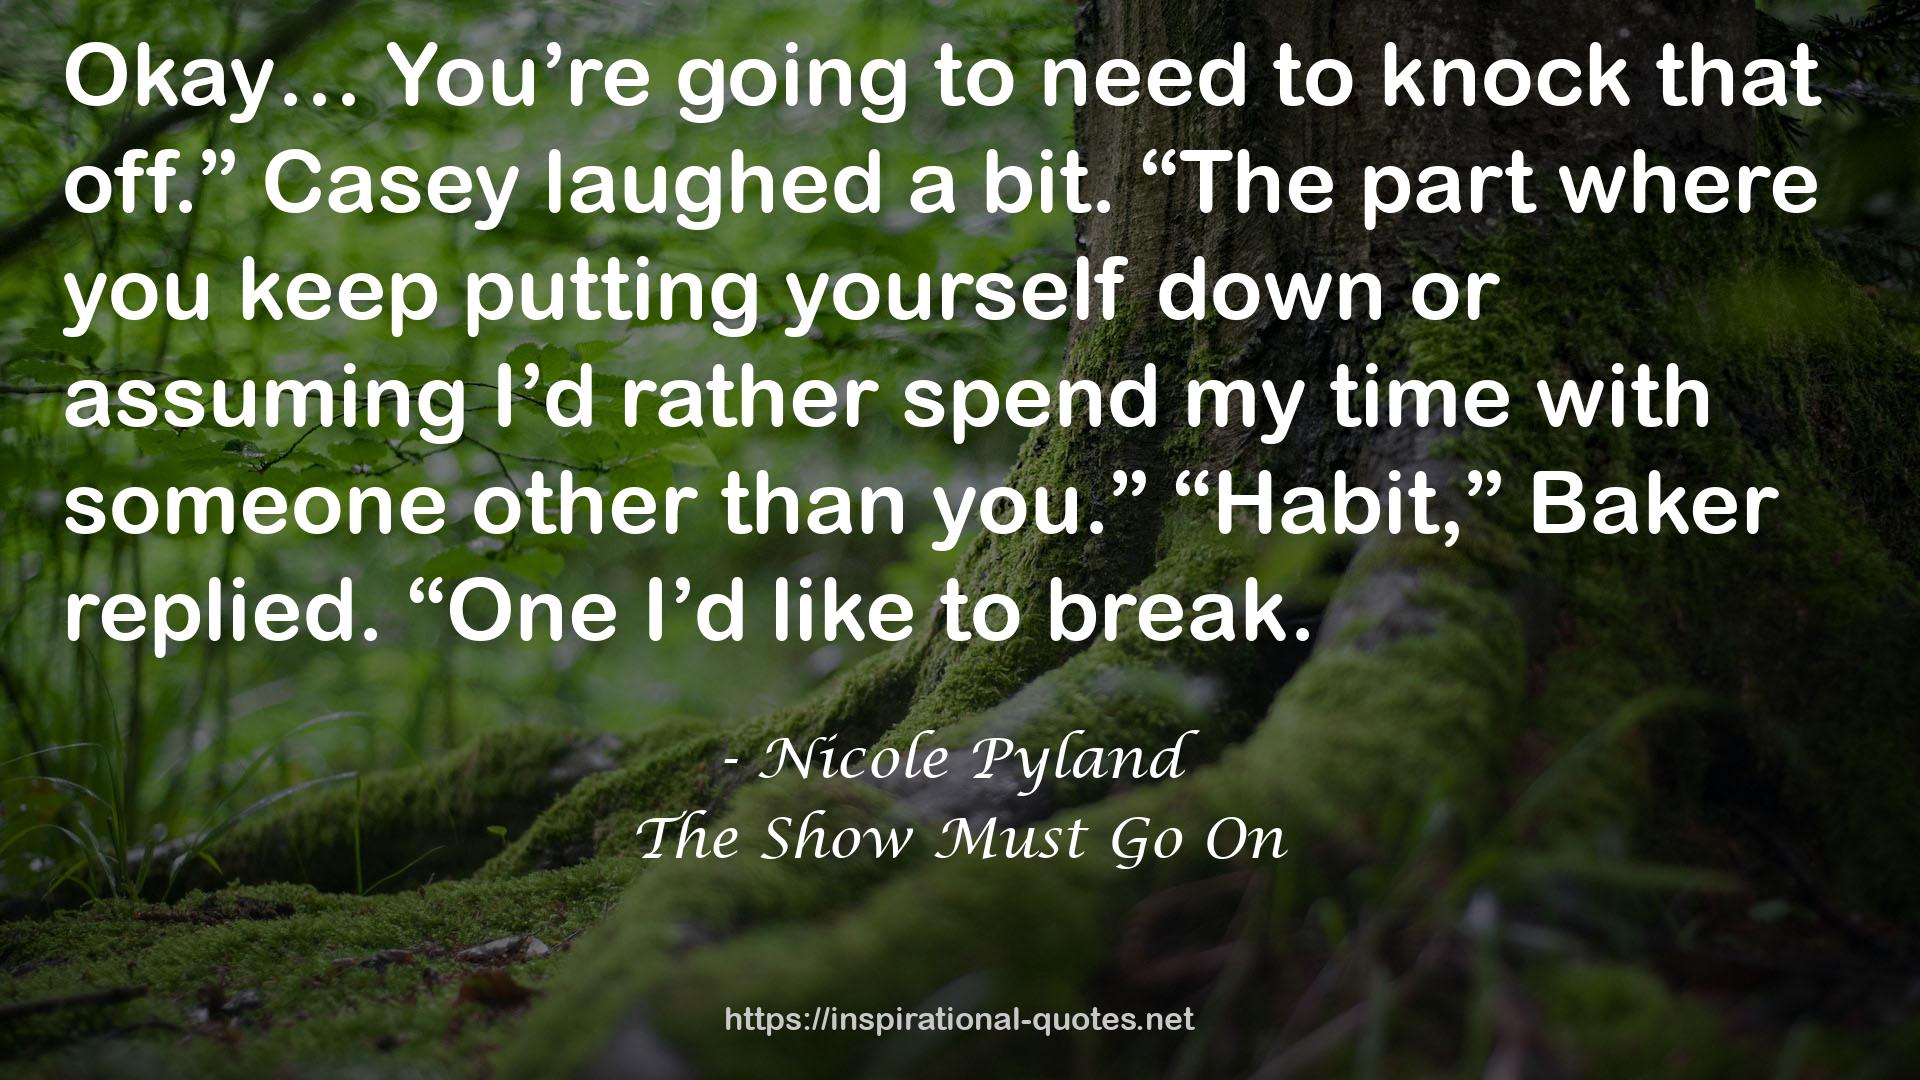 The Show Must Go On QUOTES